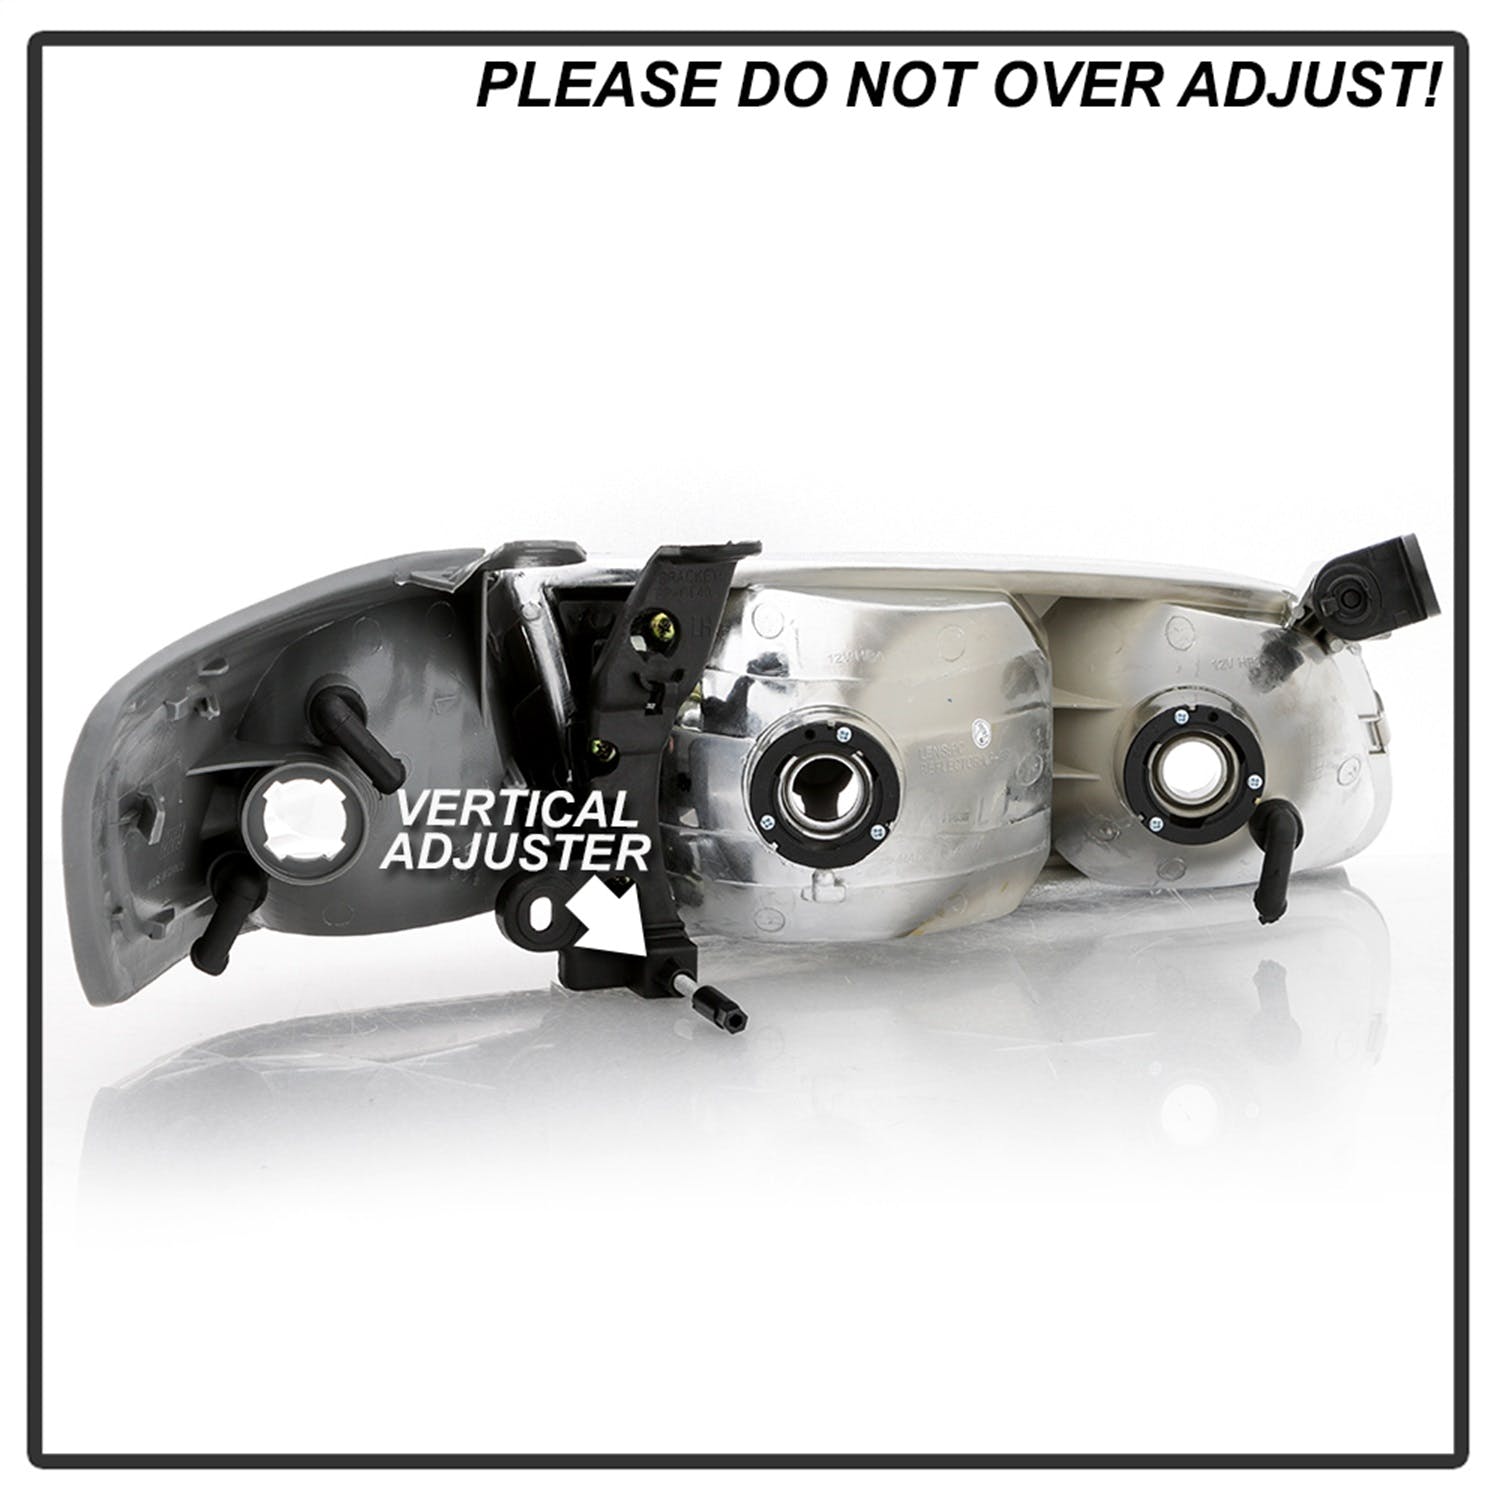 XTUNE POWER 9042812 Toyota Camry 00 01 OEM Style Headlights With Corner lights 4pcs sets Low Beam HB4(Not Included) ; High Beam HB3(Not Included) ; Signal 3157NA(Not Included) Chrome